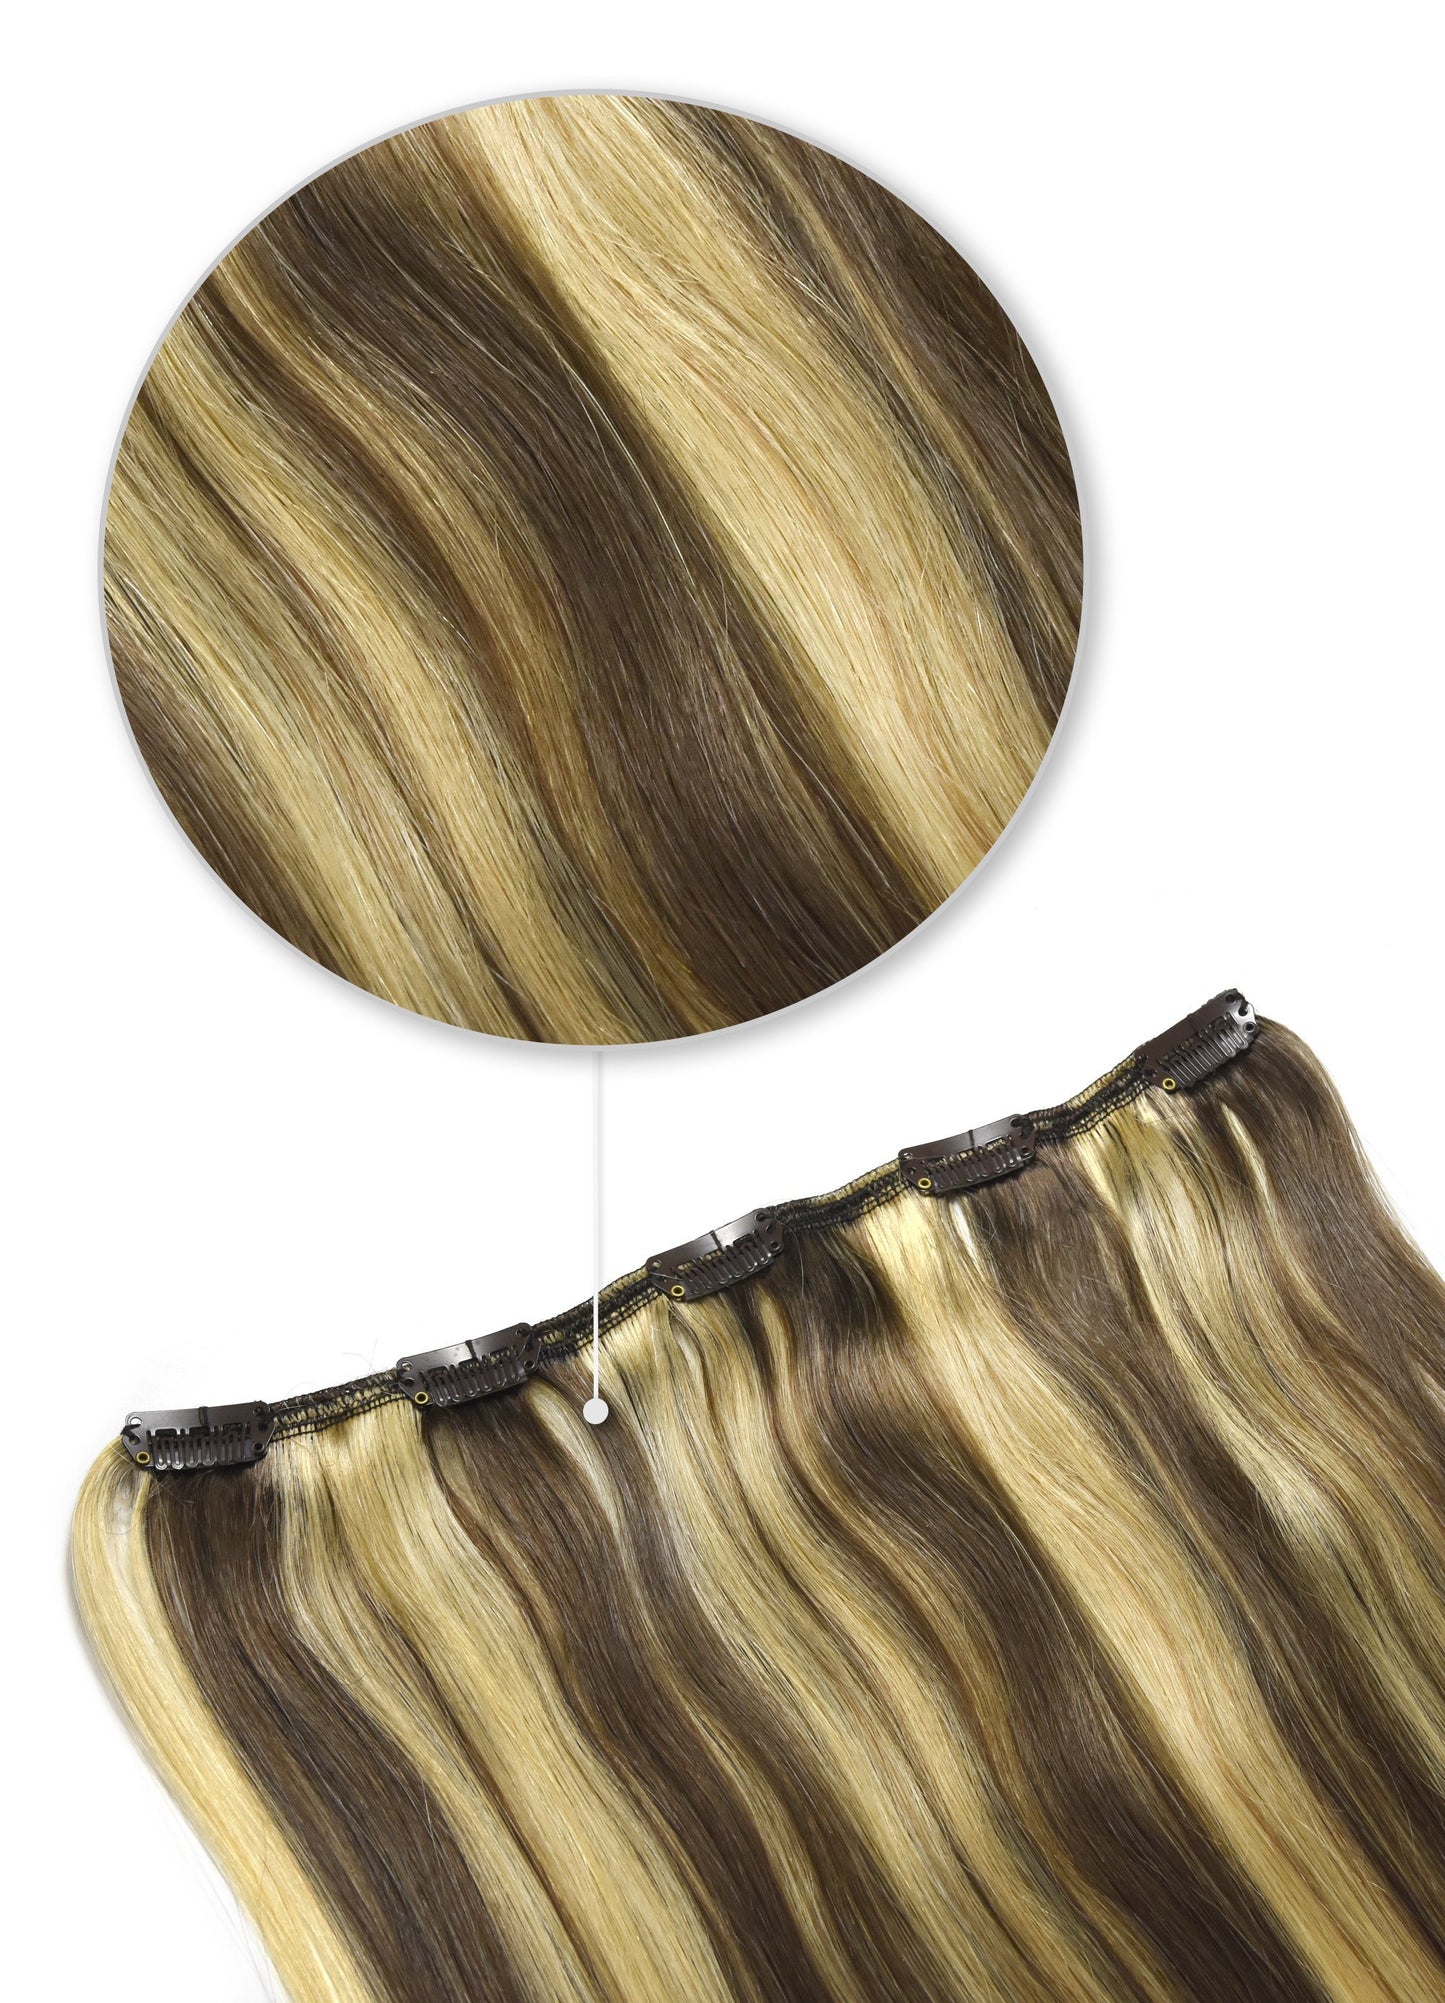 One Piece Top-up Remy Clip in Human Hair Extensions - Ash Brown/Bleach Blonde Mix (#9/613) One Piece Clip In Hair Extensions cliphair 